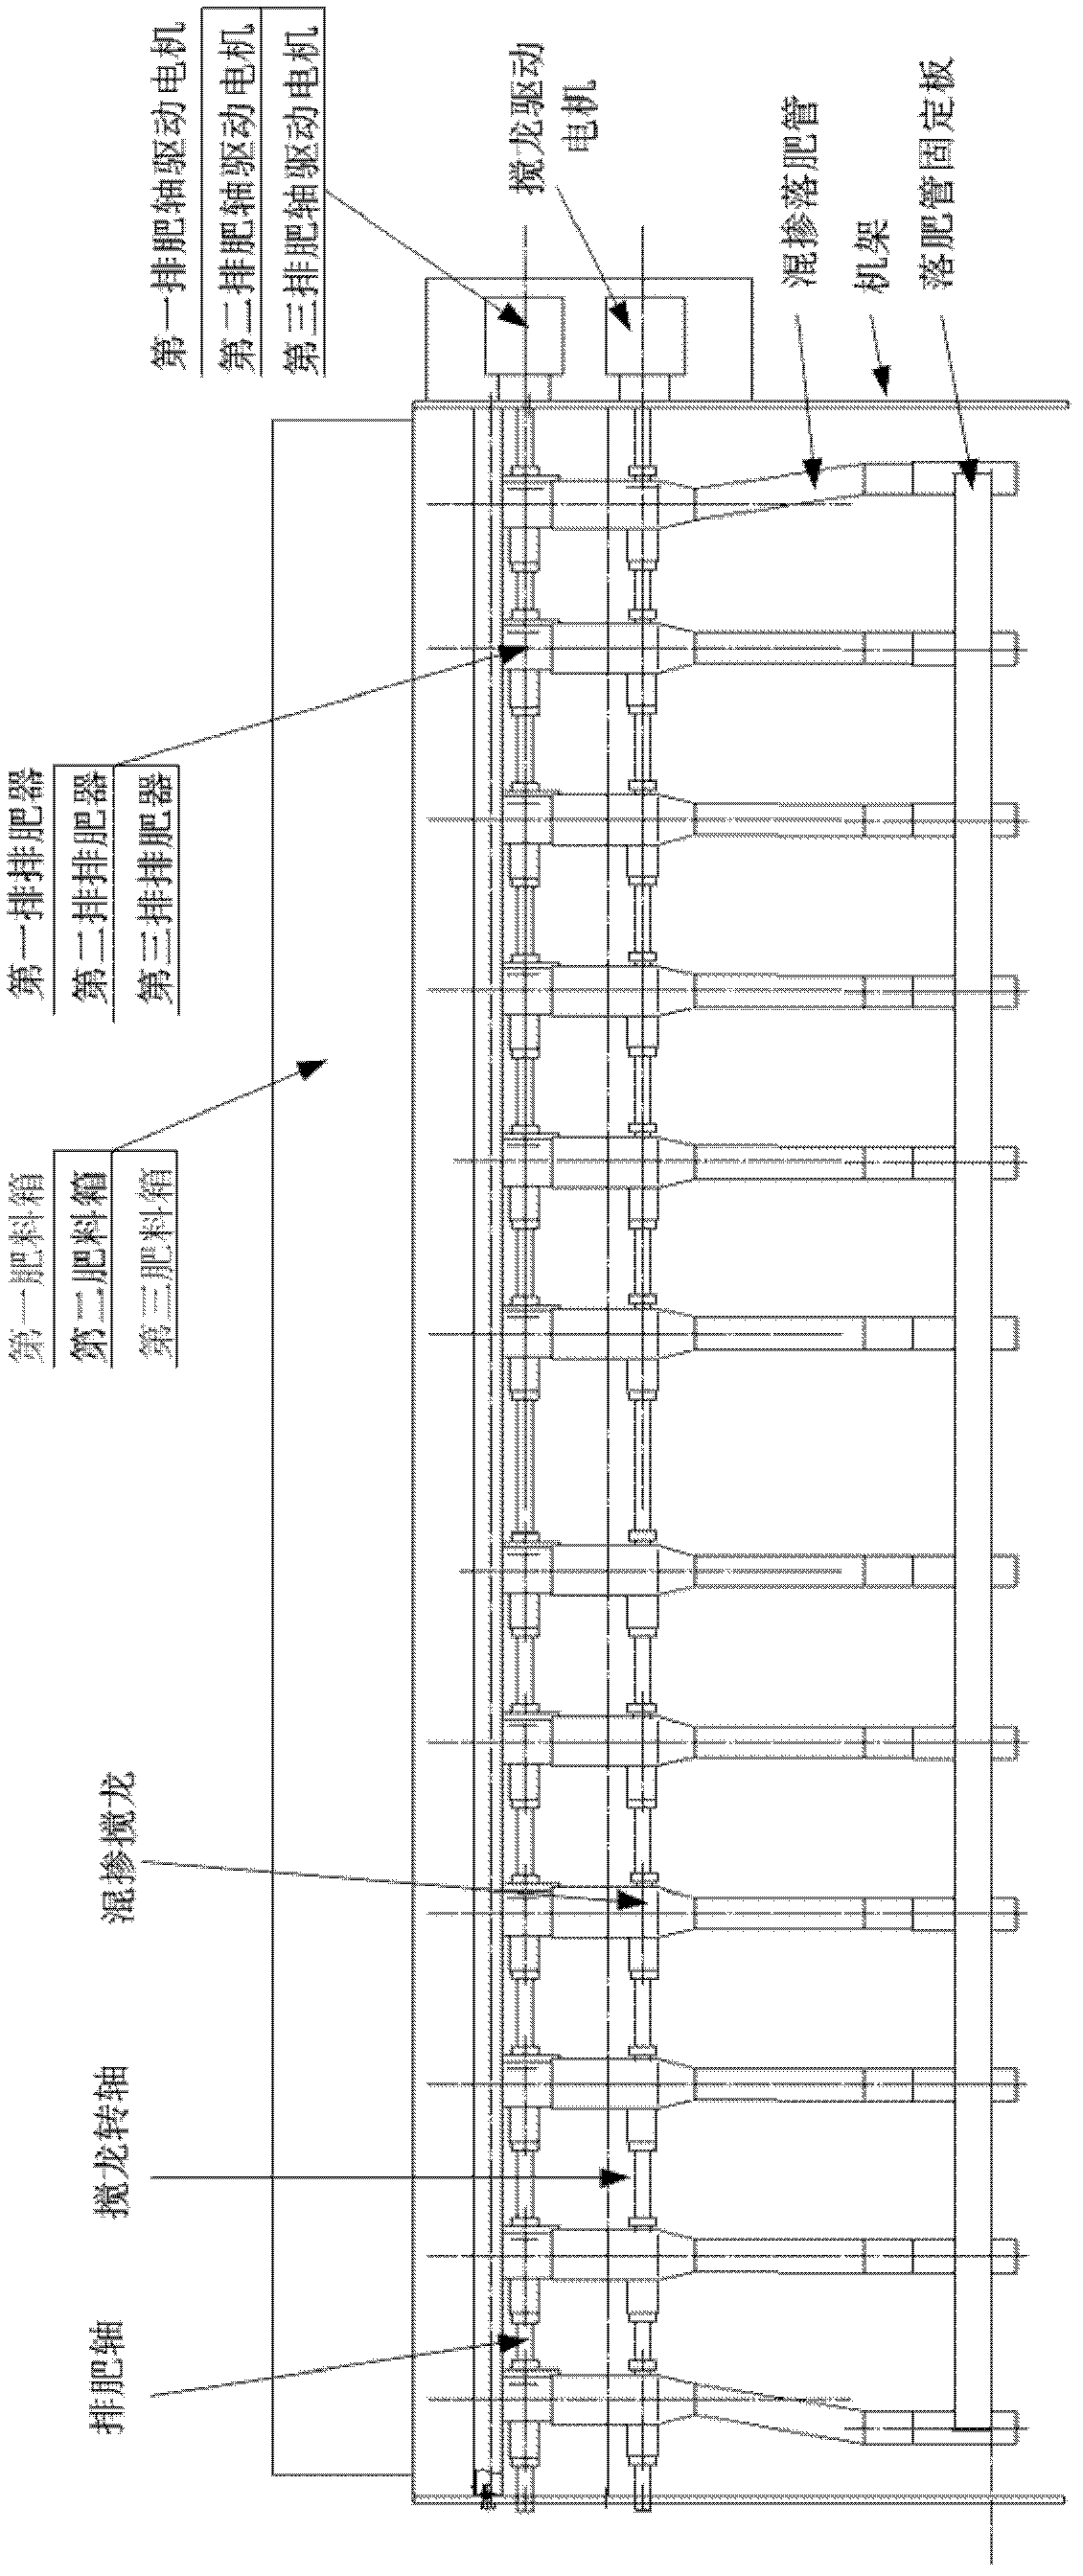 Full variable fertilizing device capable of adjusting fertilizer sowing quantity and proportion and control method thereof